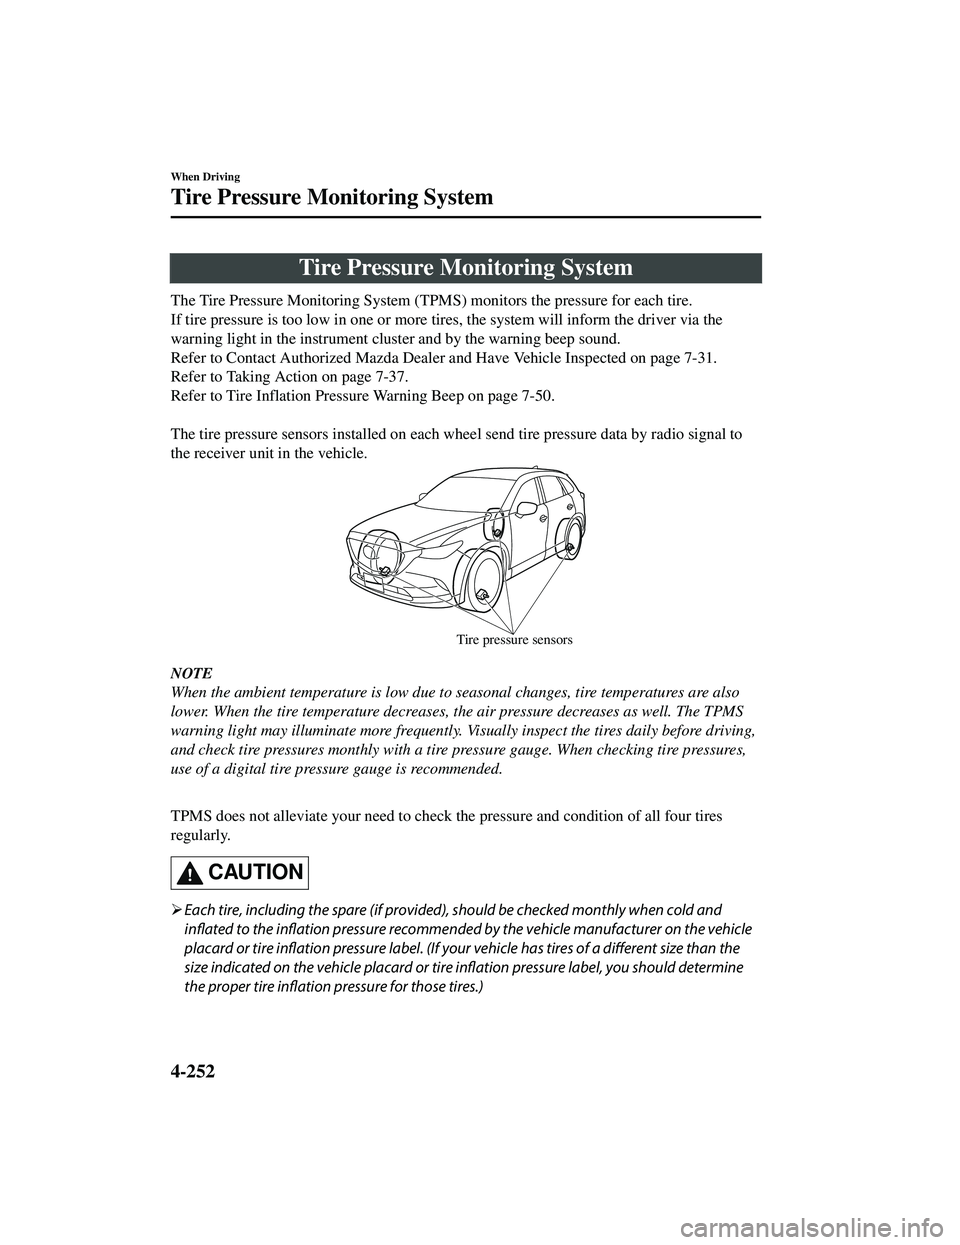 MAZDA MODEL CX-9 2021  Owners Manual Tire Pressure Monitoring System
The Tire Pressure Monitoring System (TPMS) monitors the pressure for each tire.
If tire pressure is too low in one or more tires, the system  will inform the driver via